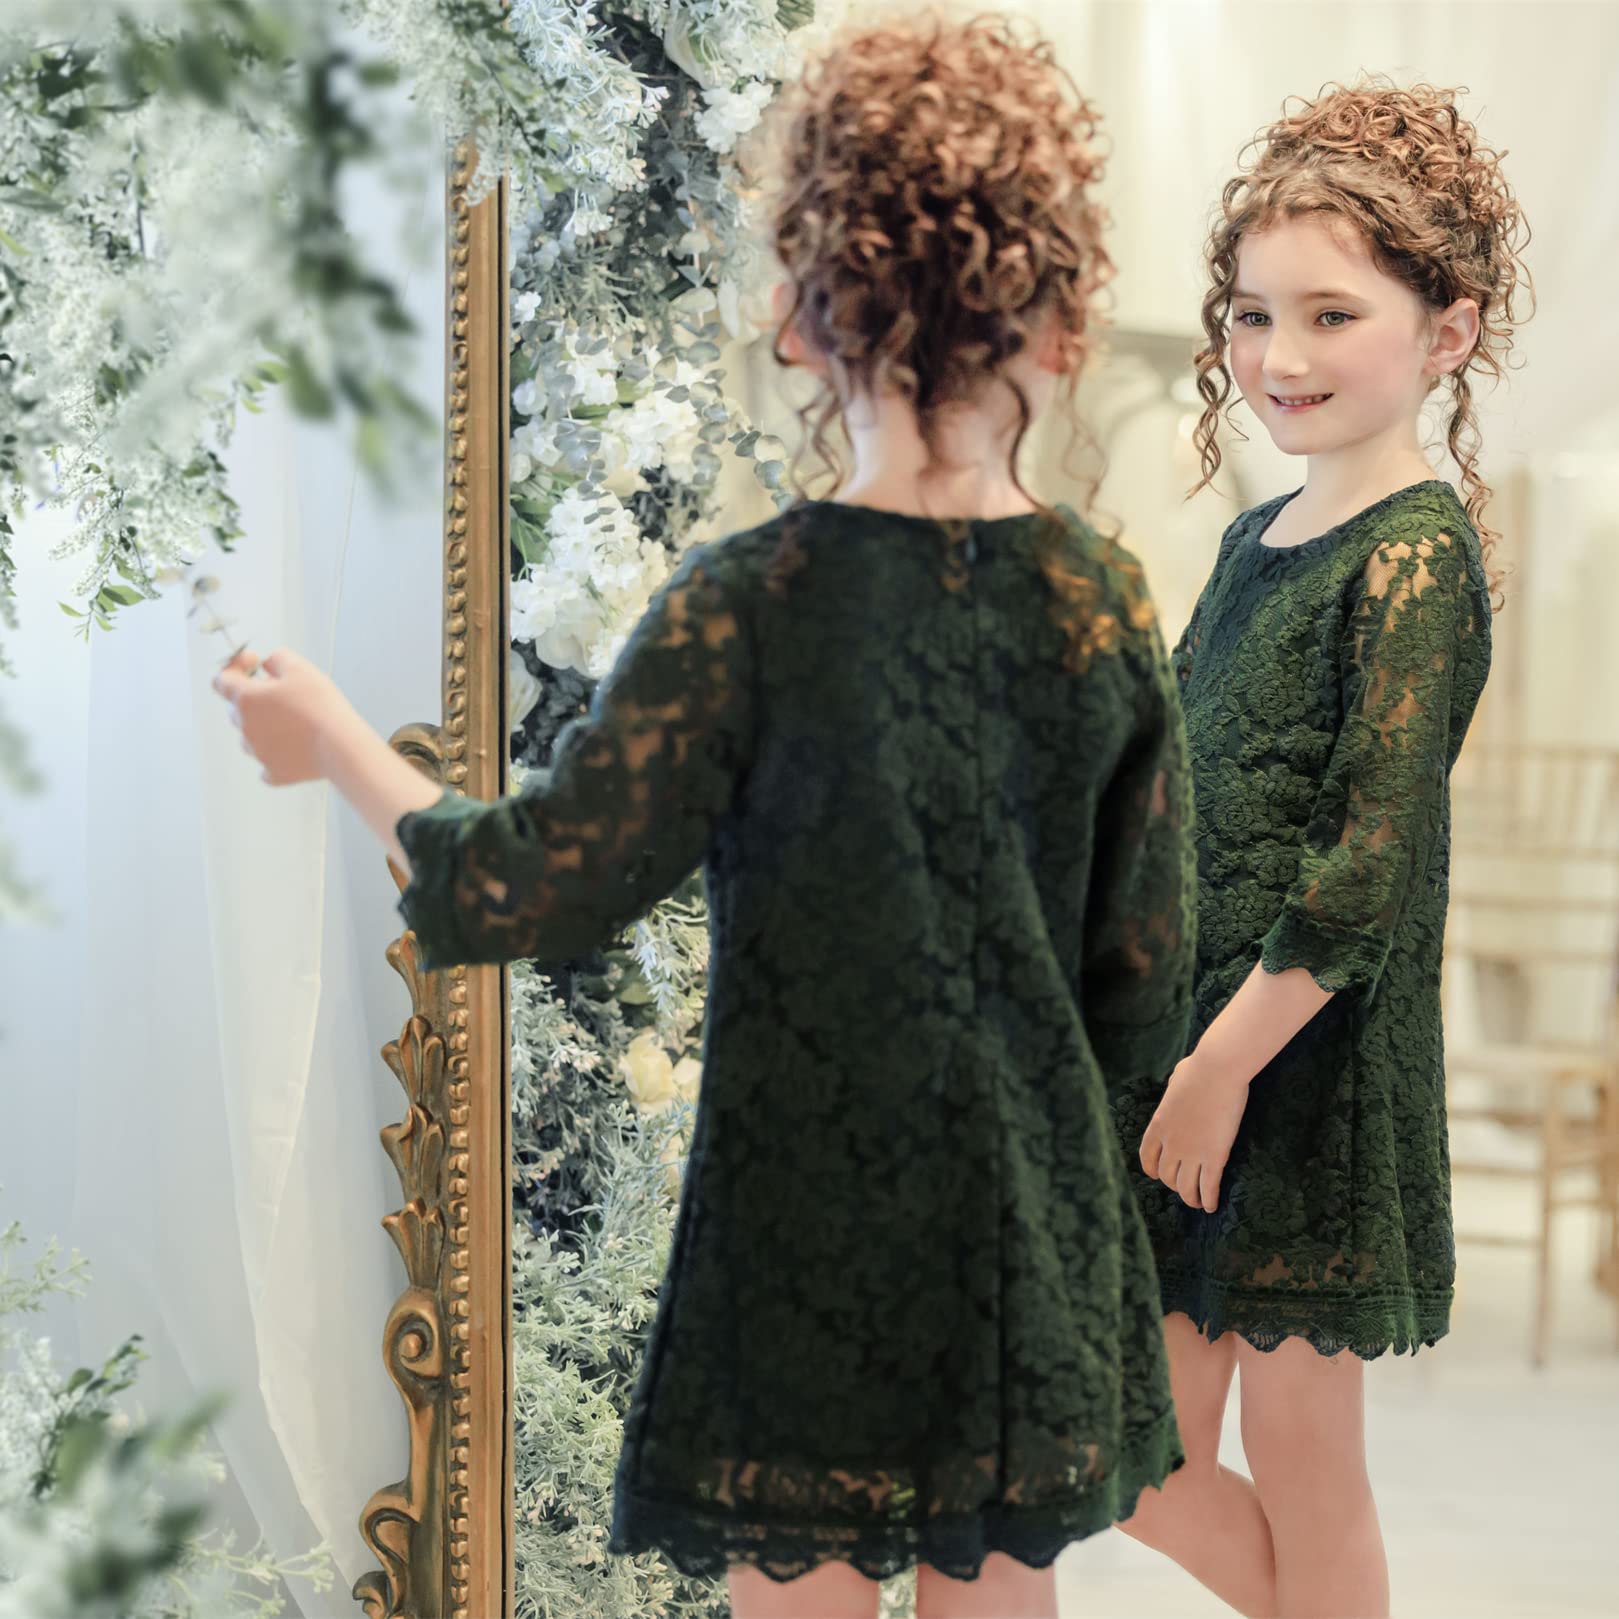 Violet Lace Boho Girl Dress in Green – 2BUNNIES